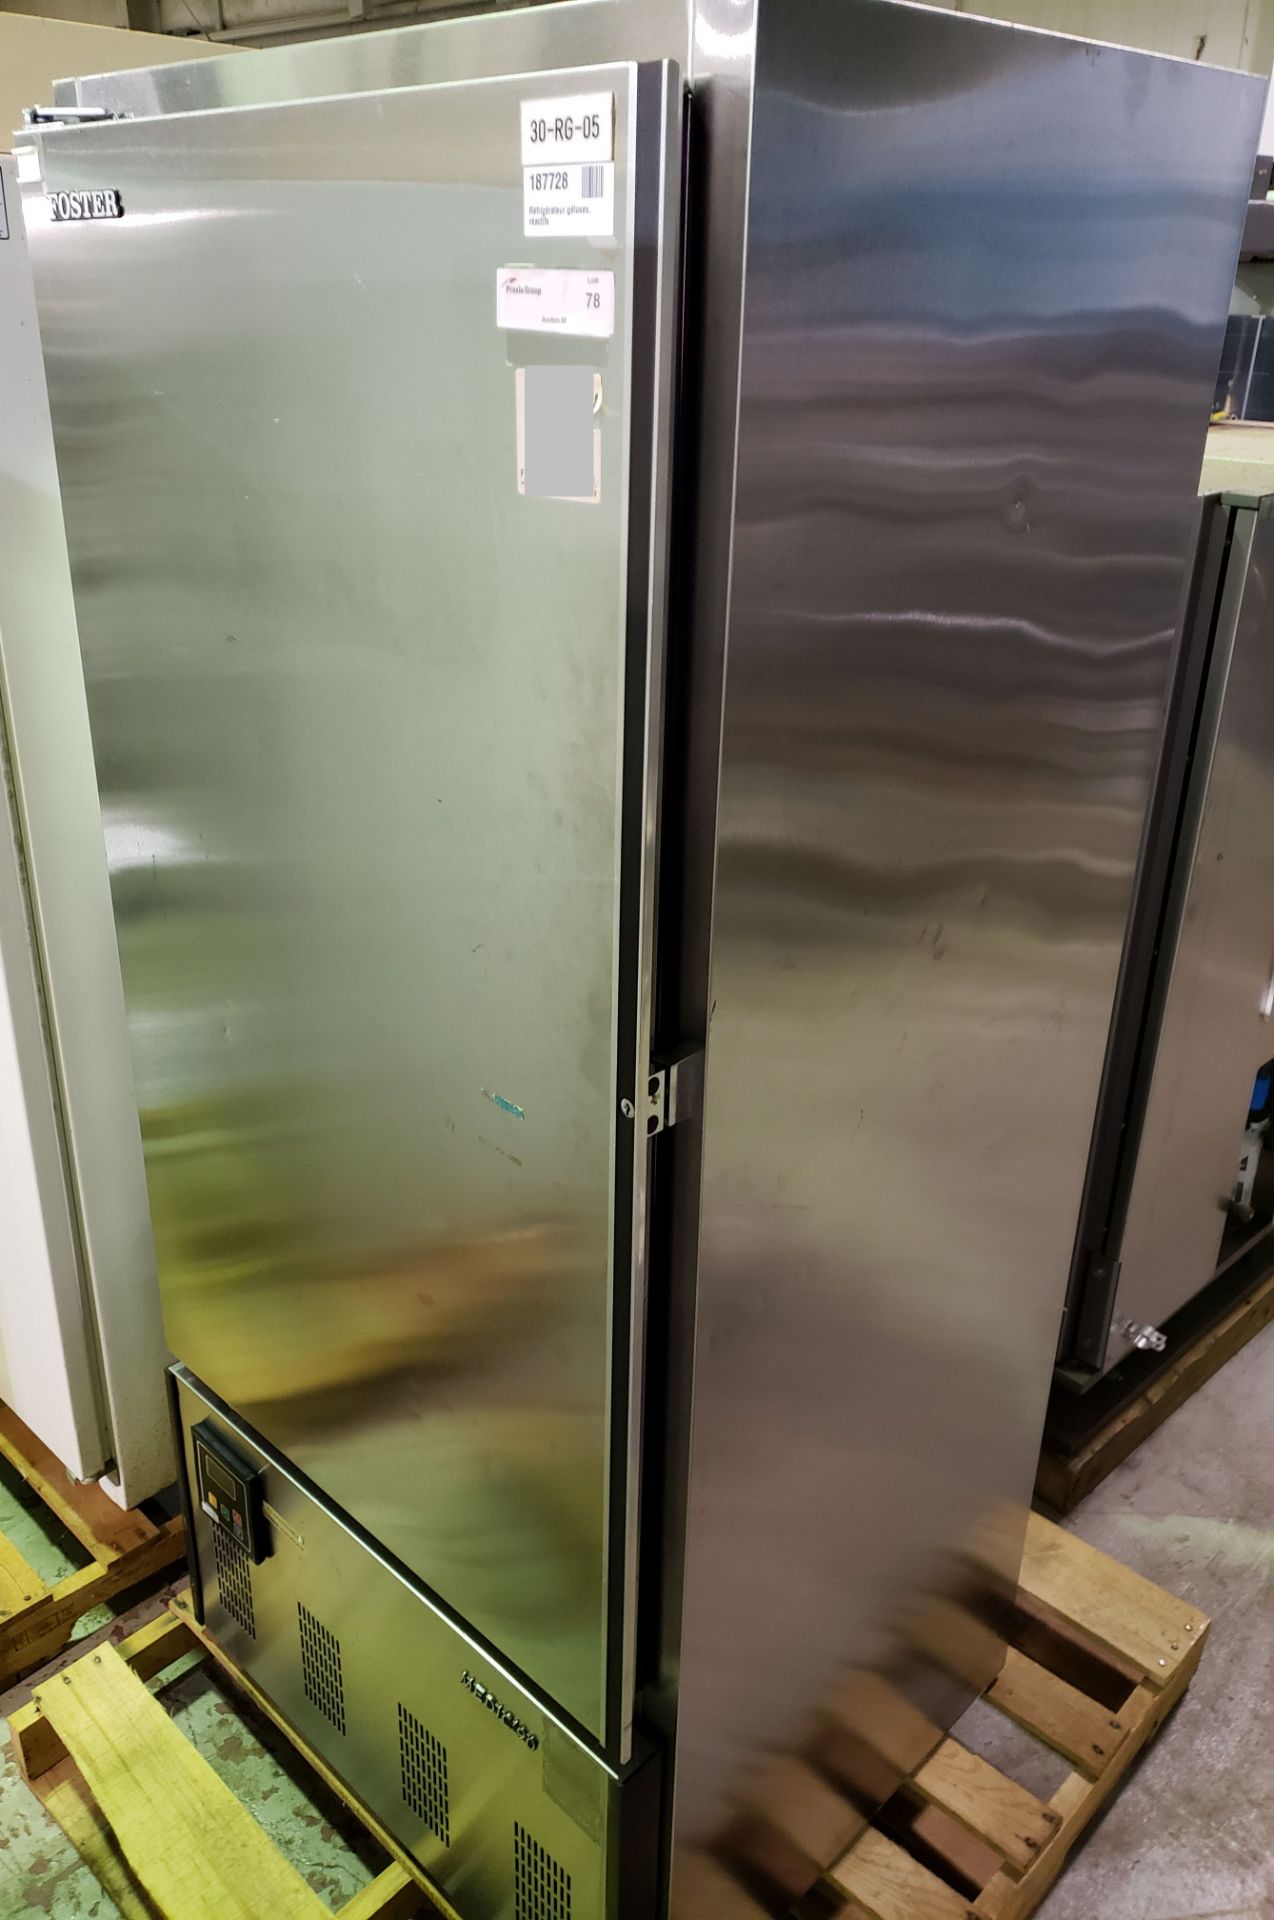 Foster freezer, modle HR-18-U(L), stainless steel construction, 48" high x 26"wide x 17" - Image 2 of 10